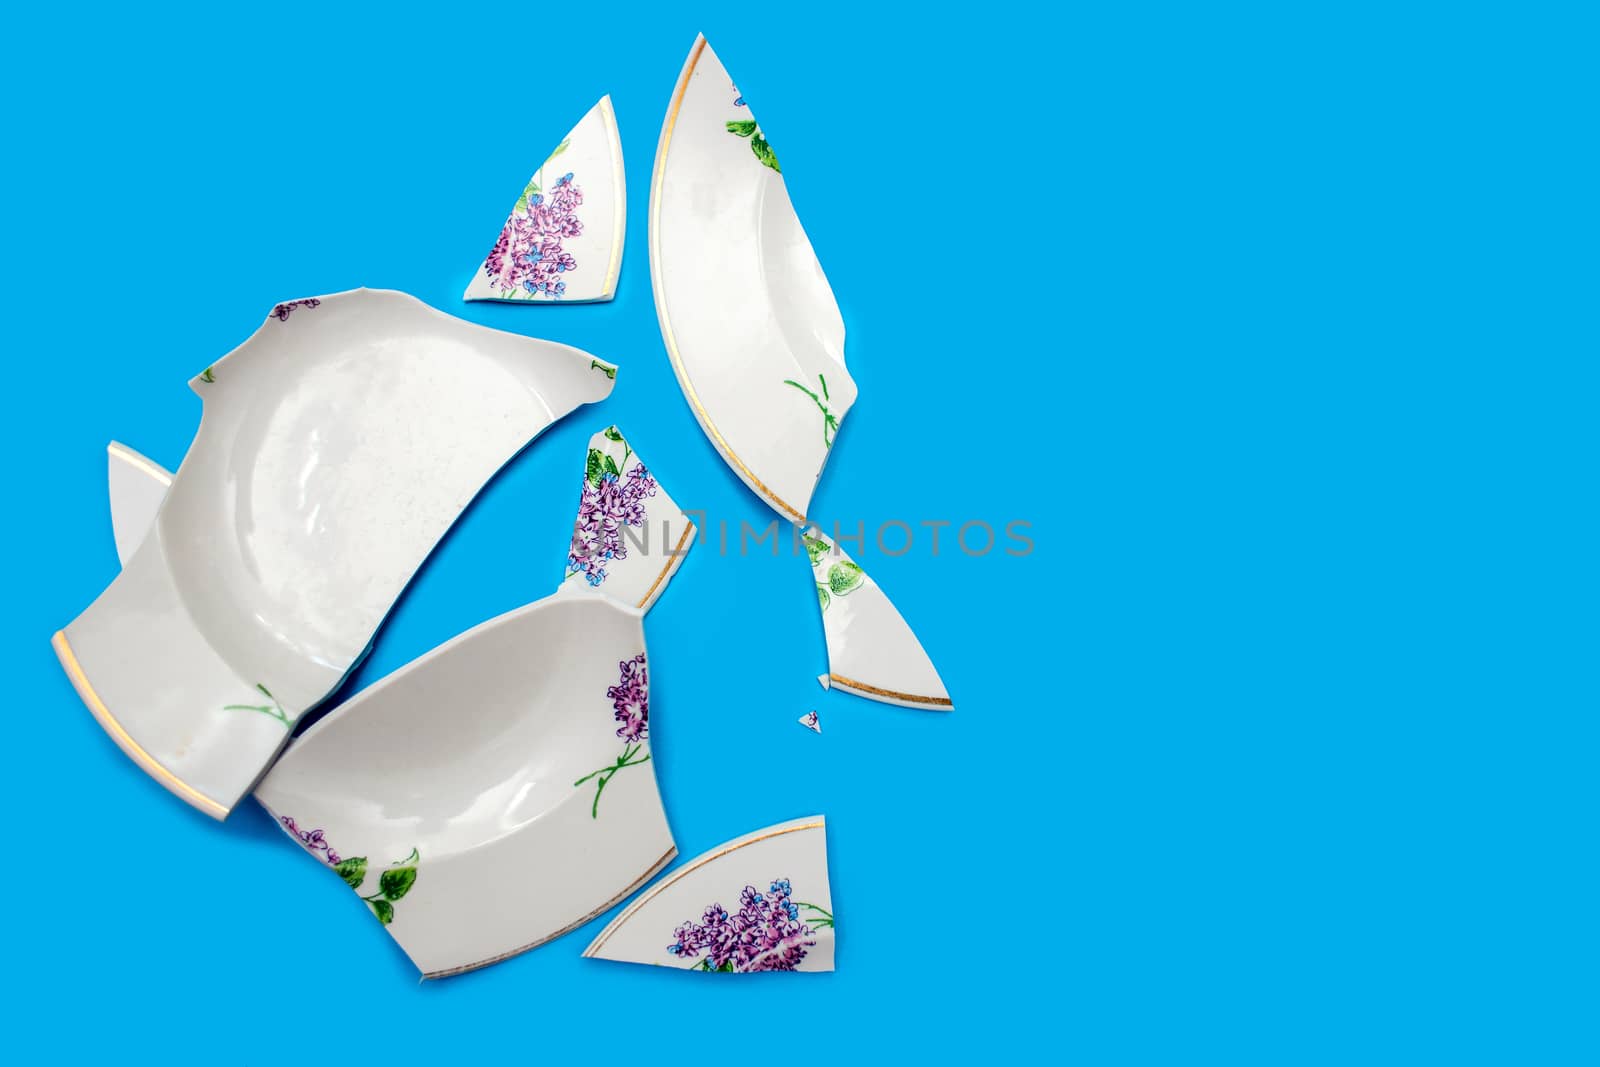 Shards of a broken plate on a blue background. Small pieces of chopped dishes.